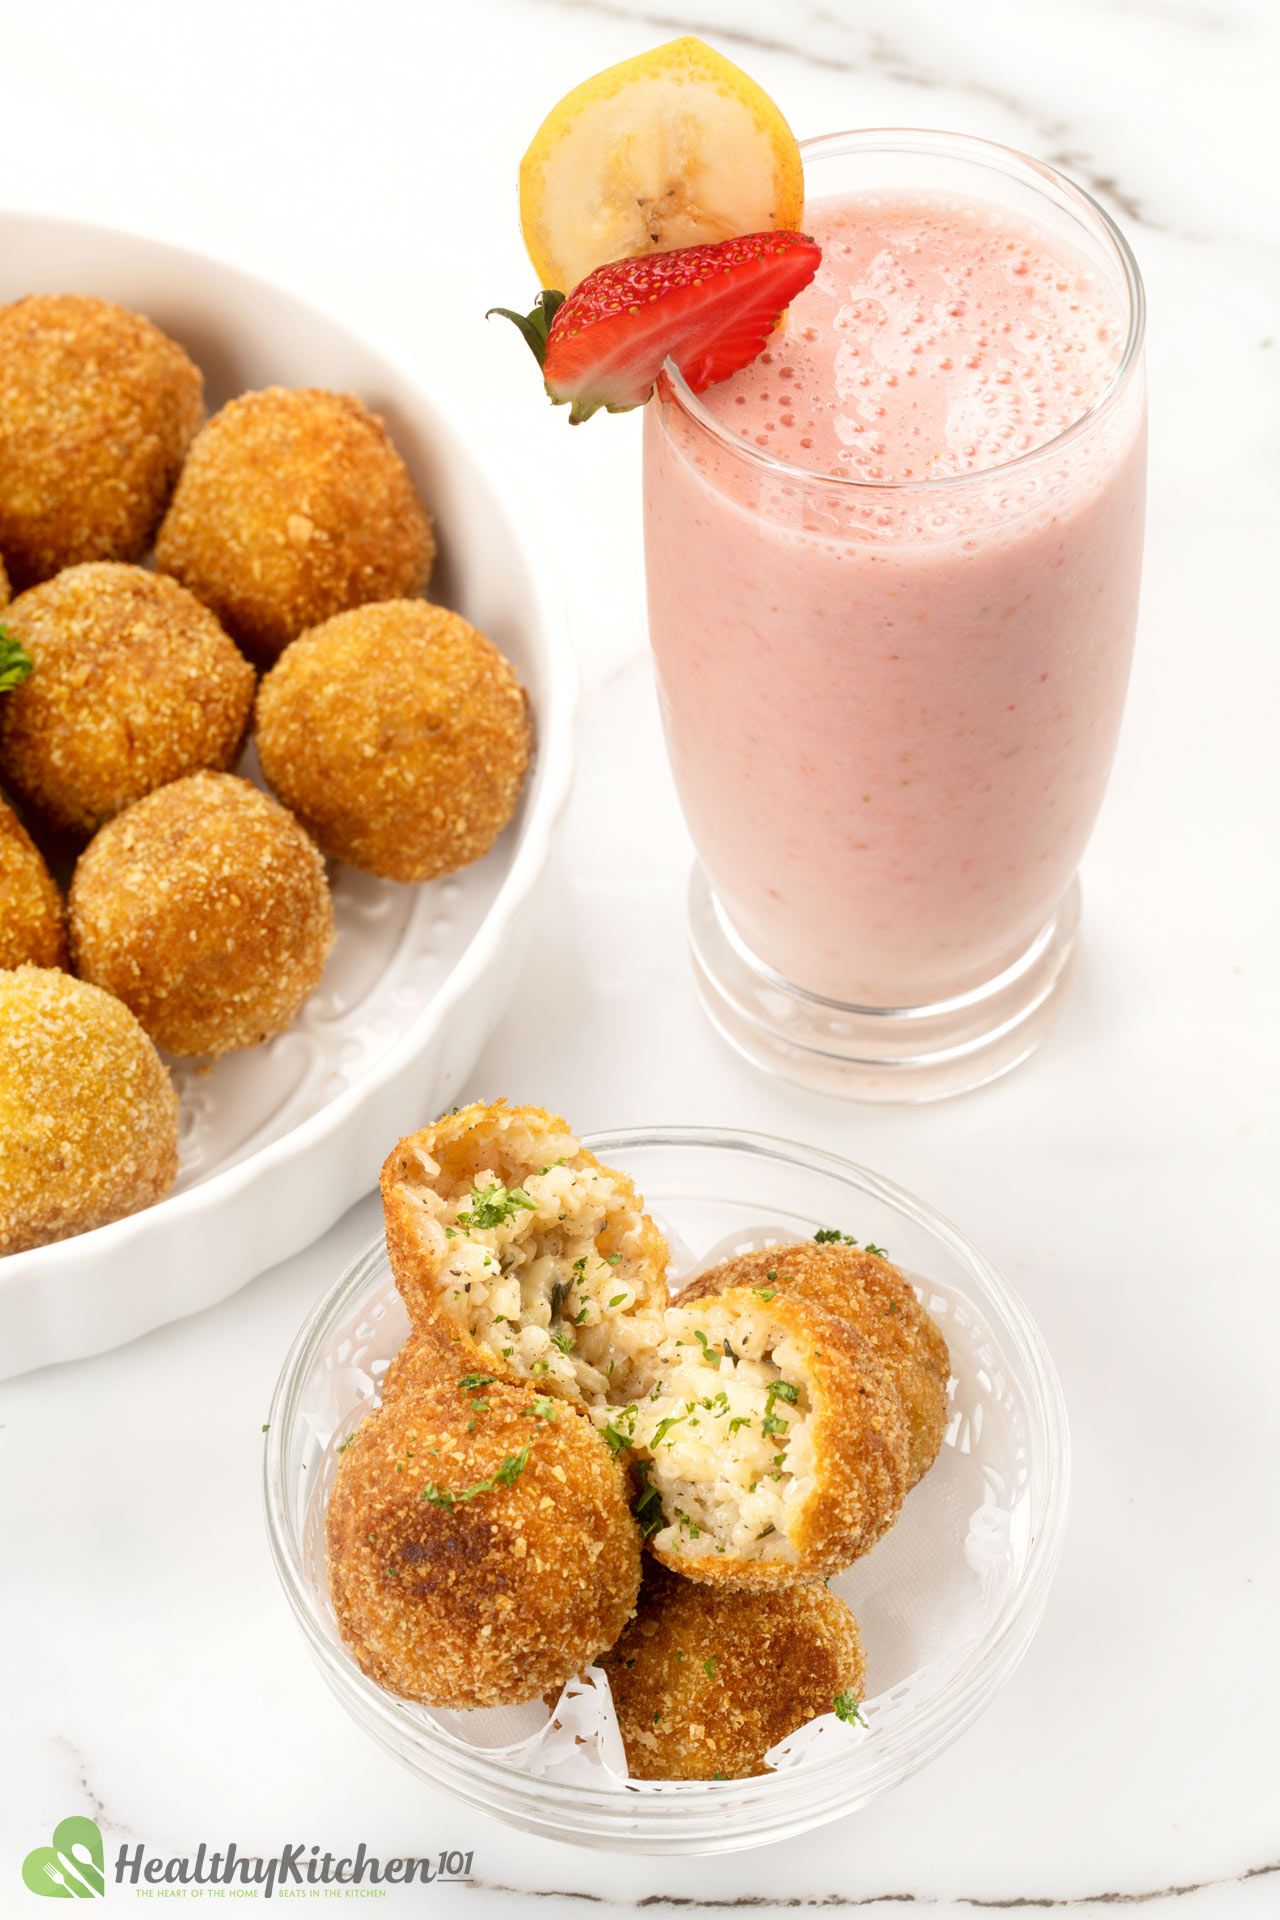 What to serve with Arancini Recipe